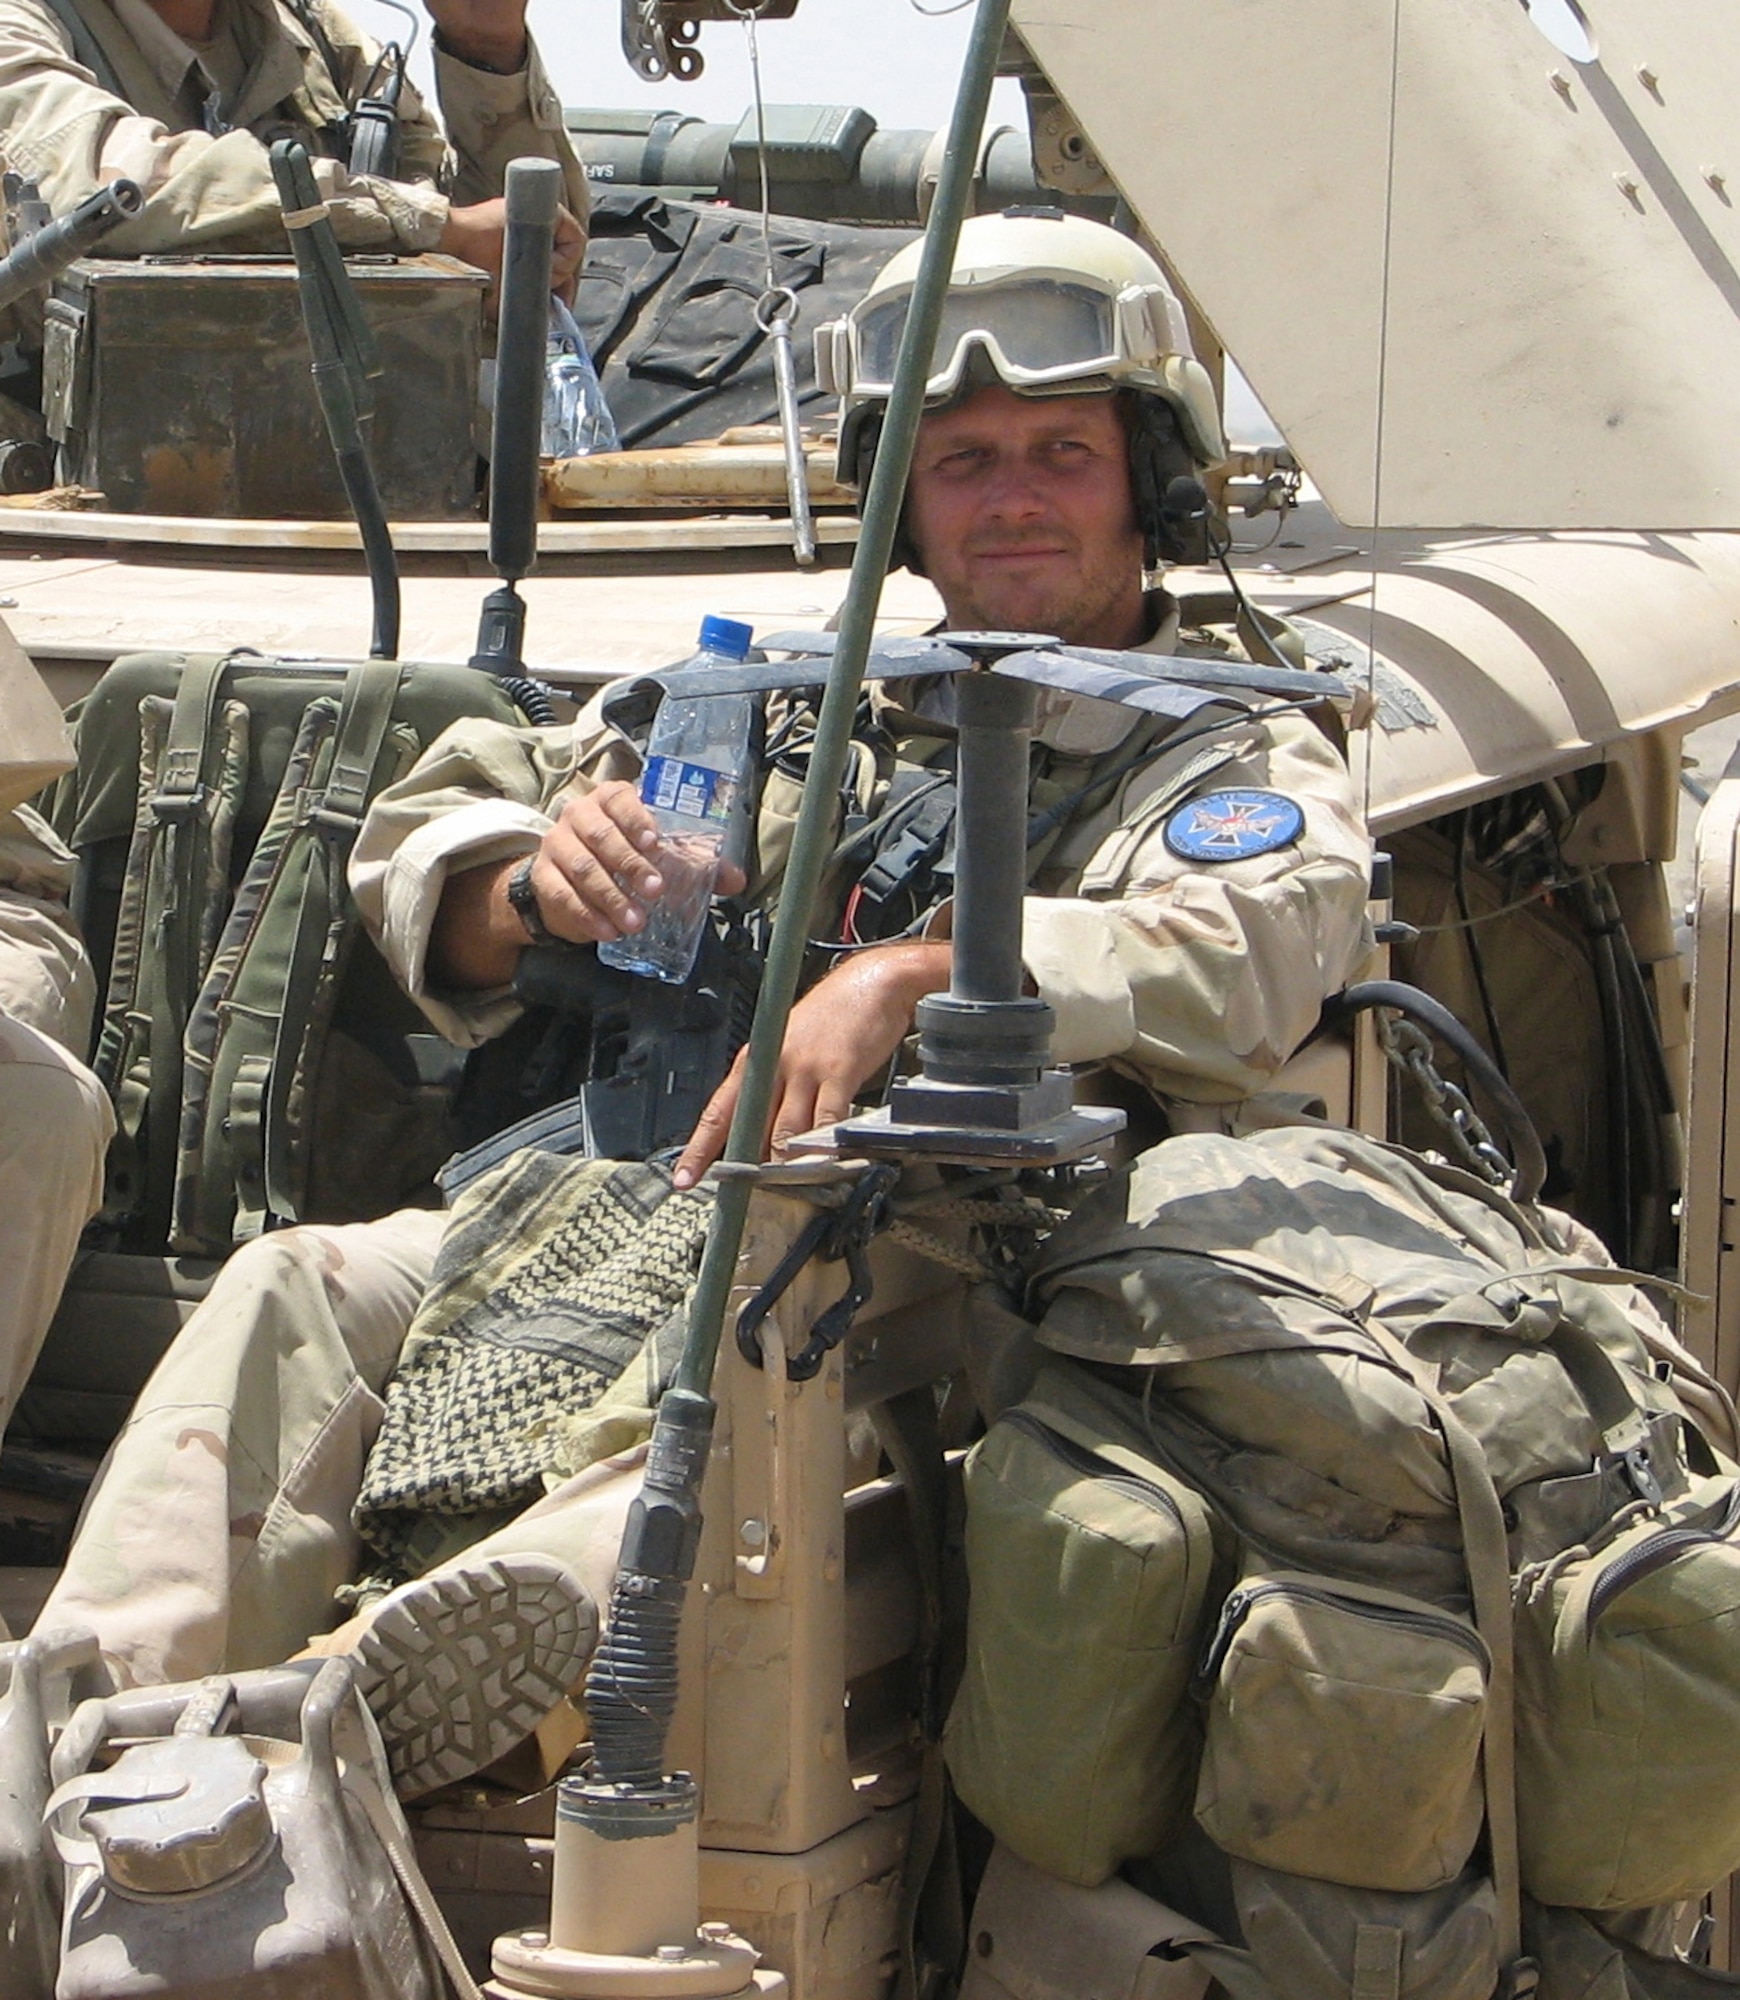 Tech. Sgt. Scott Innis, a combat controller with the 22nd Special Tactics Squadron, is pictured during his 2006 deployment to Afghanistan. During this deployment, Sergeant Innis served as a joint terminal air controller attached to an Army Special Forces team. One day, his team's forward operating base came under heavy enemy fire. Sergeant Innis risked his life by climbing up a small, wooden observation tower in the middle of the base in order to direct close air support against the enemy. Despite making himself a magnet for bullets and rocket propelled grenades, the combat controller stayed in the tower for 24 hours directing fire, resulting in the elimination of more than 100 enemy fighters. Sergeant Innis was presented a Silver Star Dec. 18 for his actions that day in Afghanistan. (Courtesy photo)